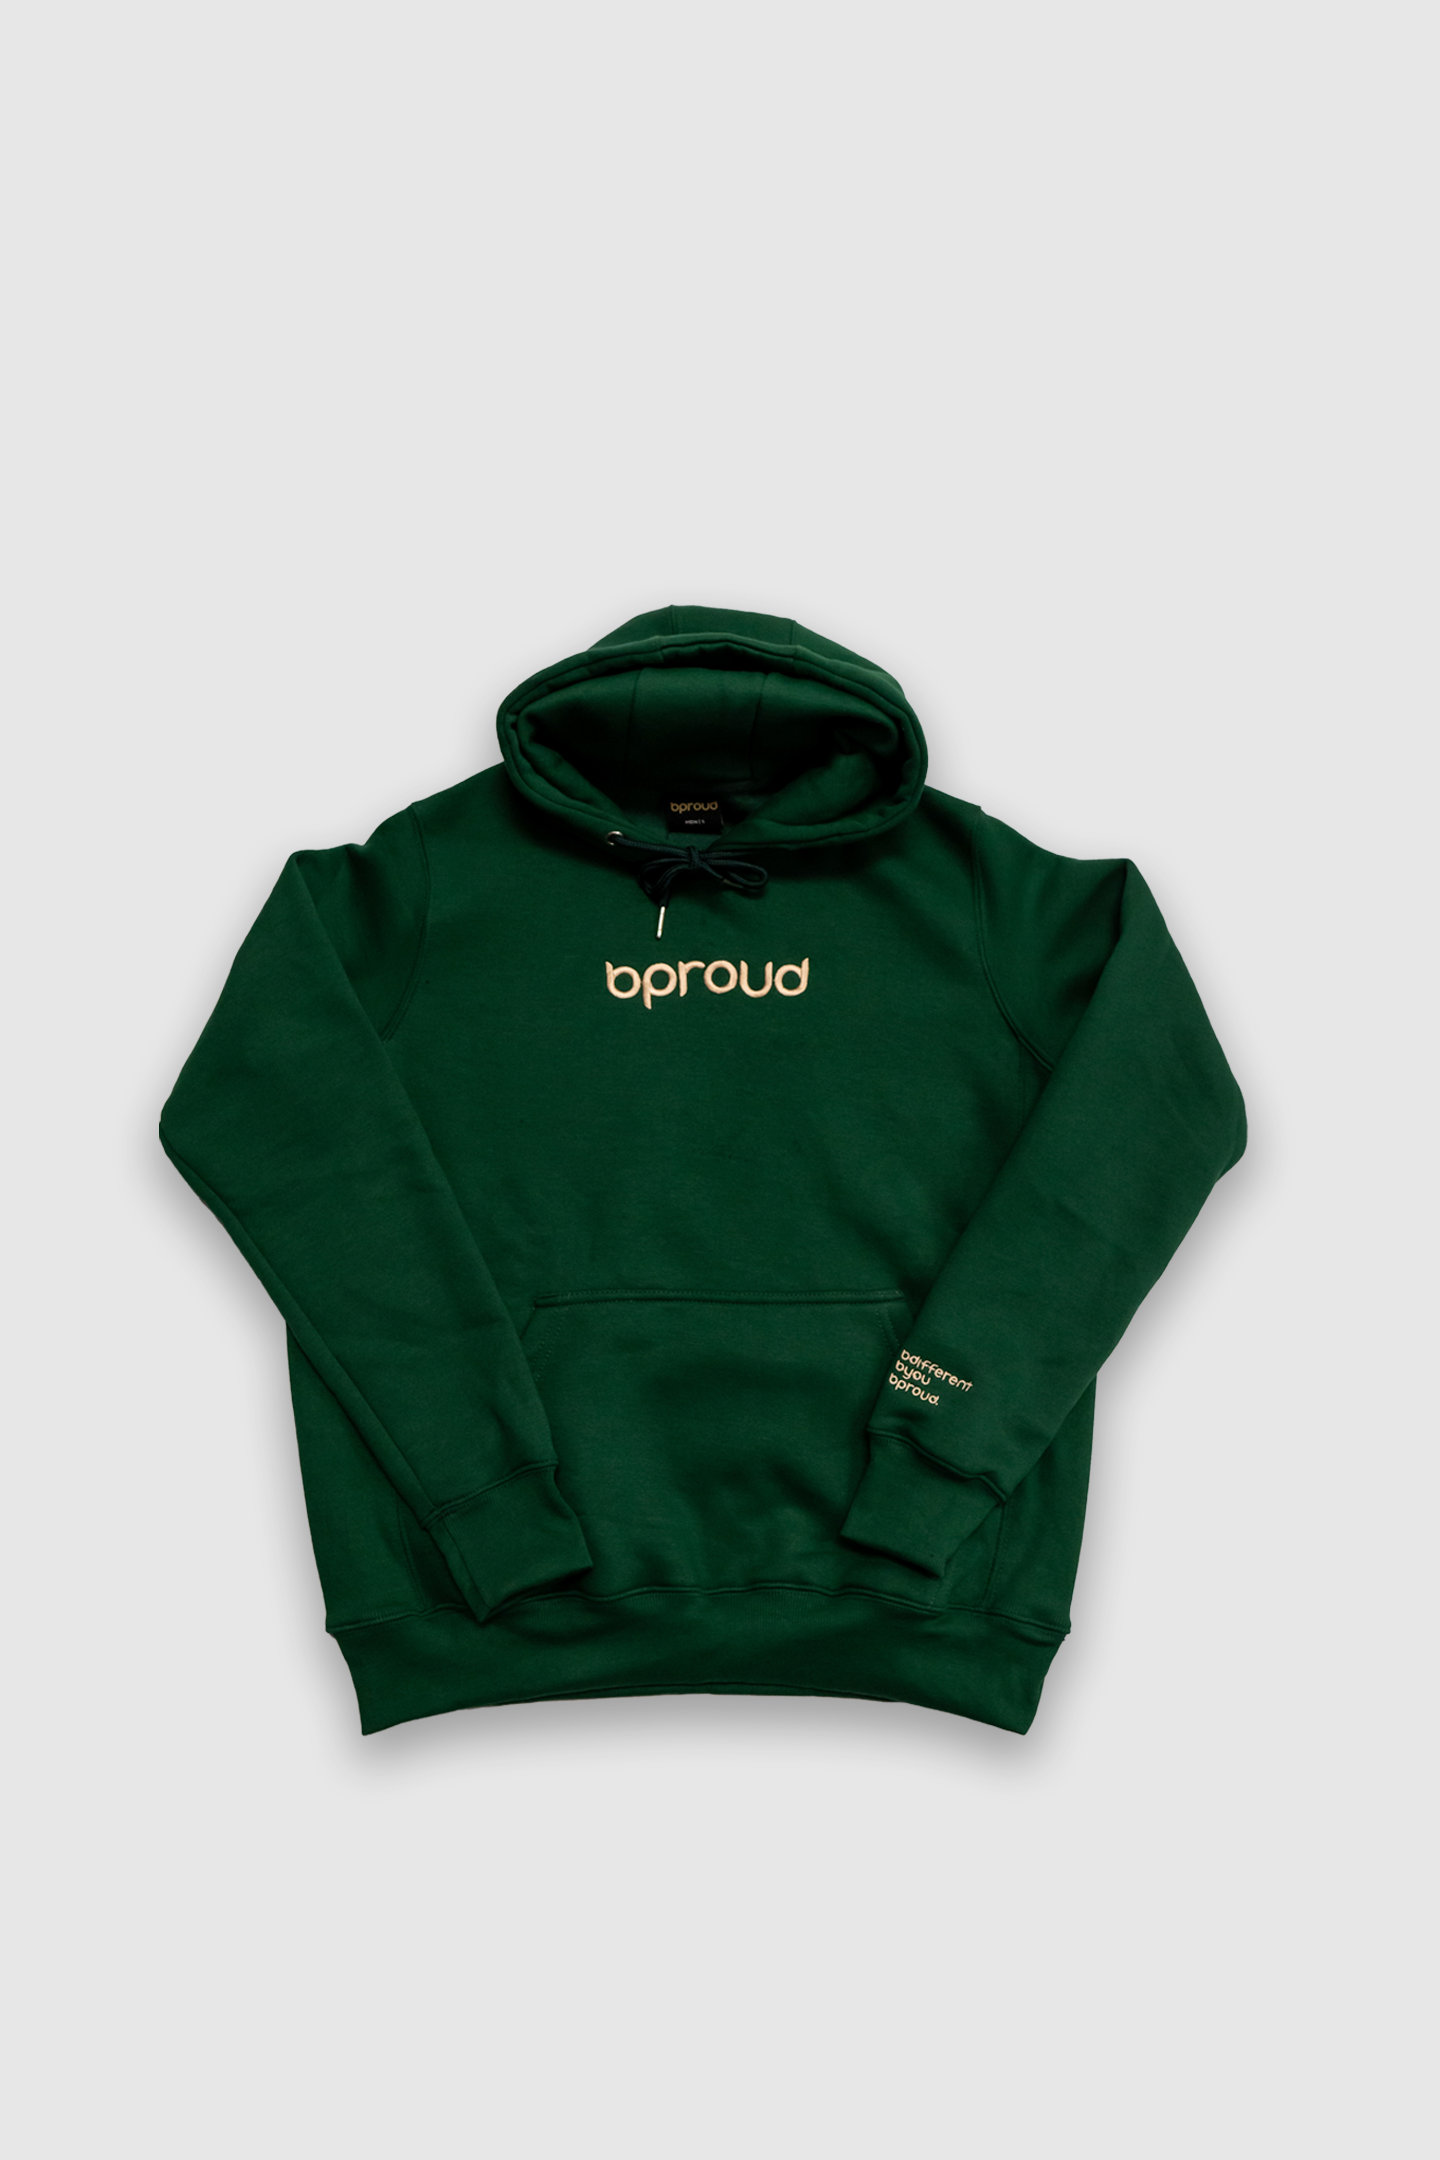 Bproud "Forest Green" Pullover Hoodie